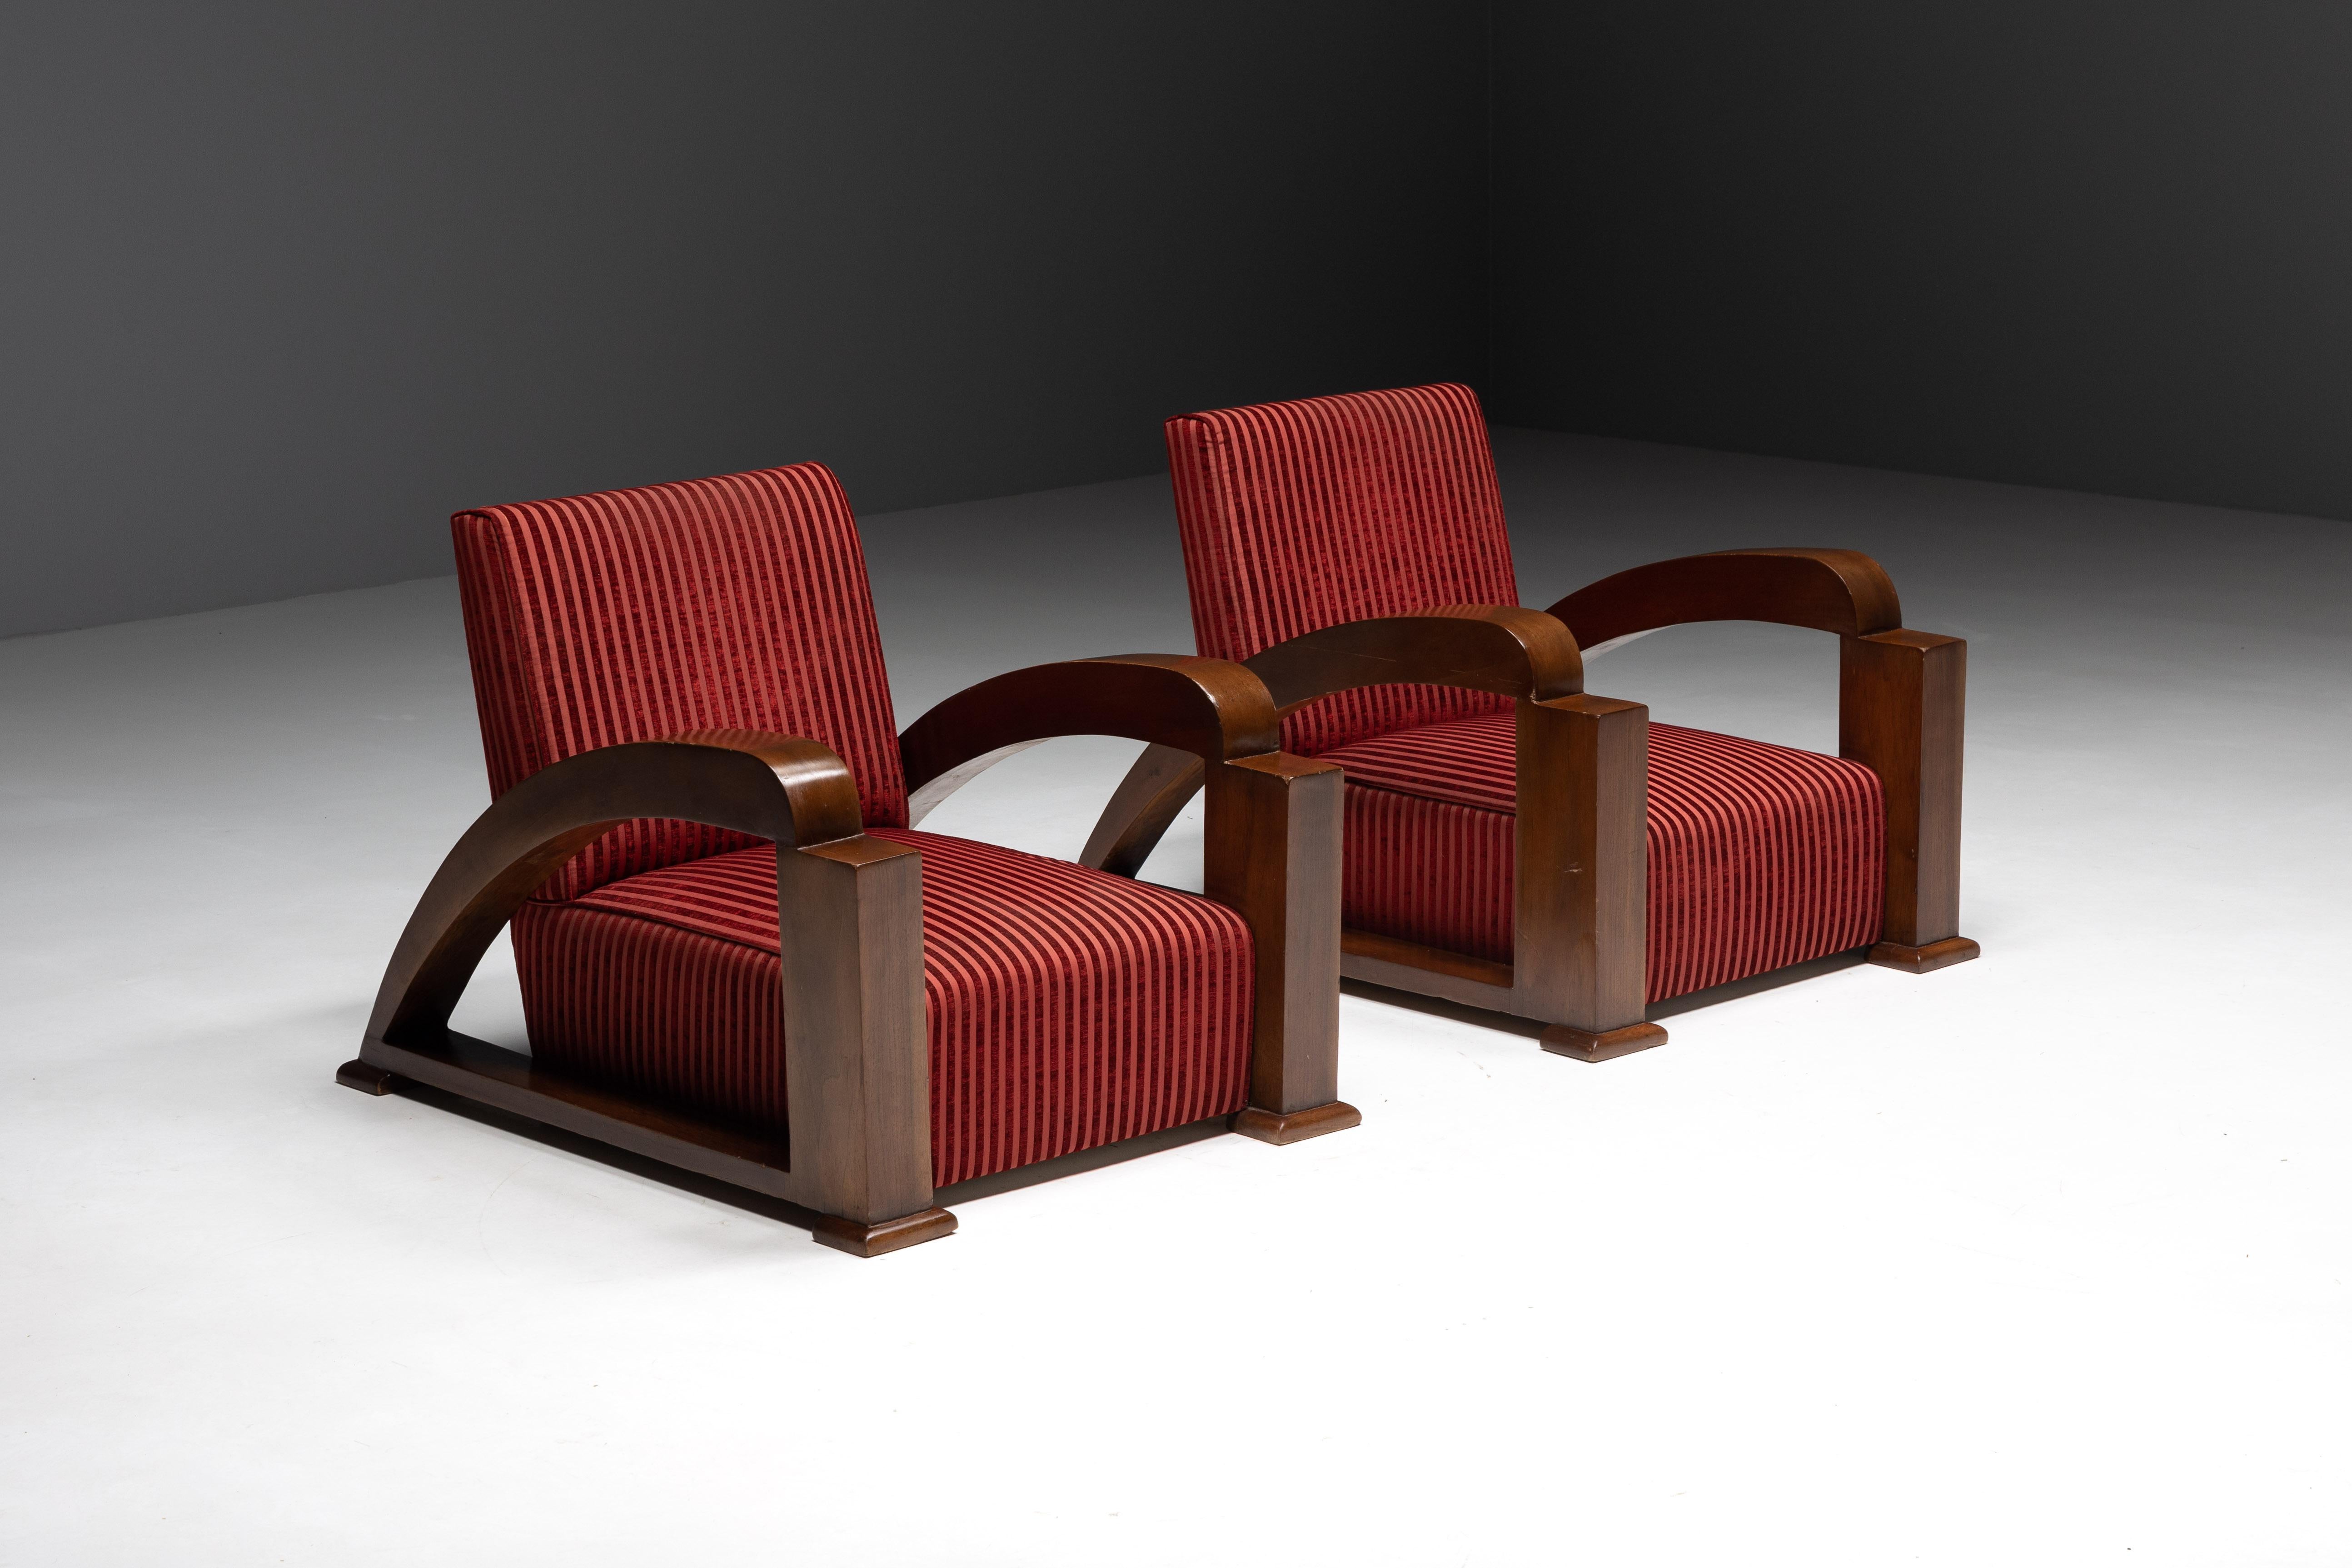 French Art Deco Armchairs in Red Striped Velvet and with Swoosh Armrests, France, 1940s For Sale